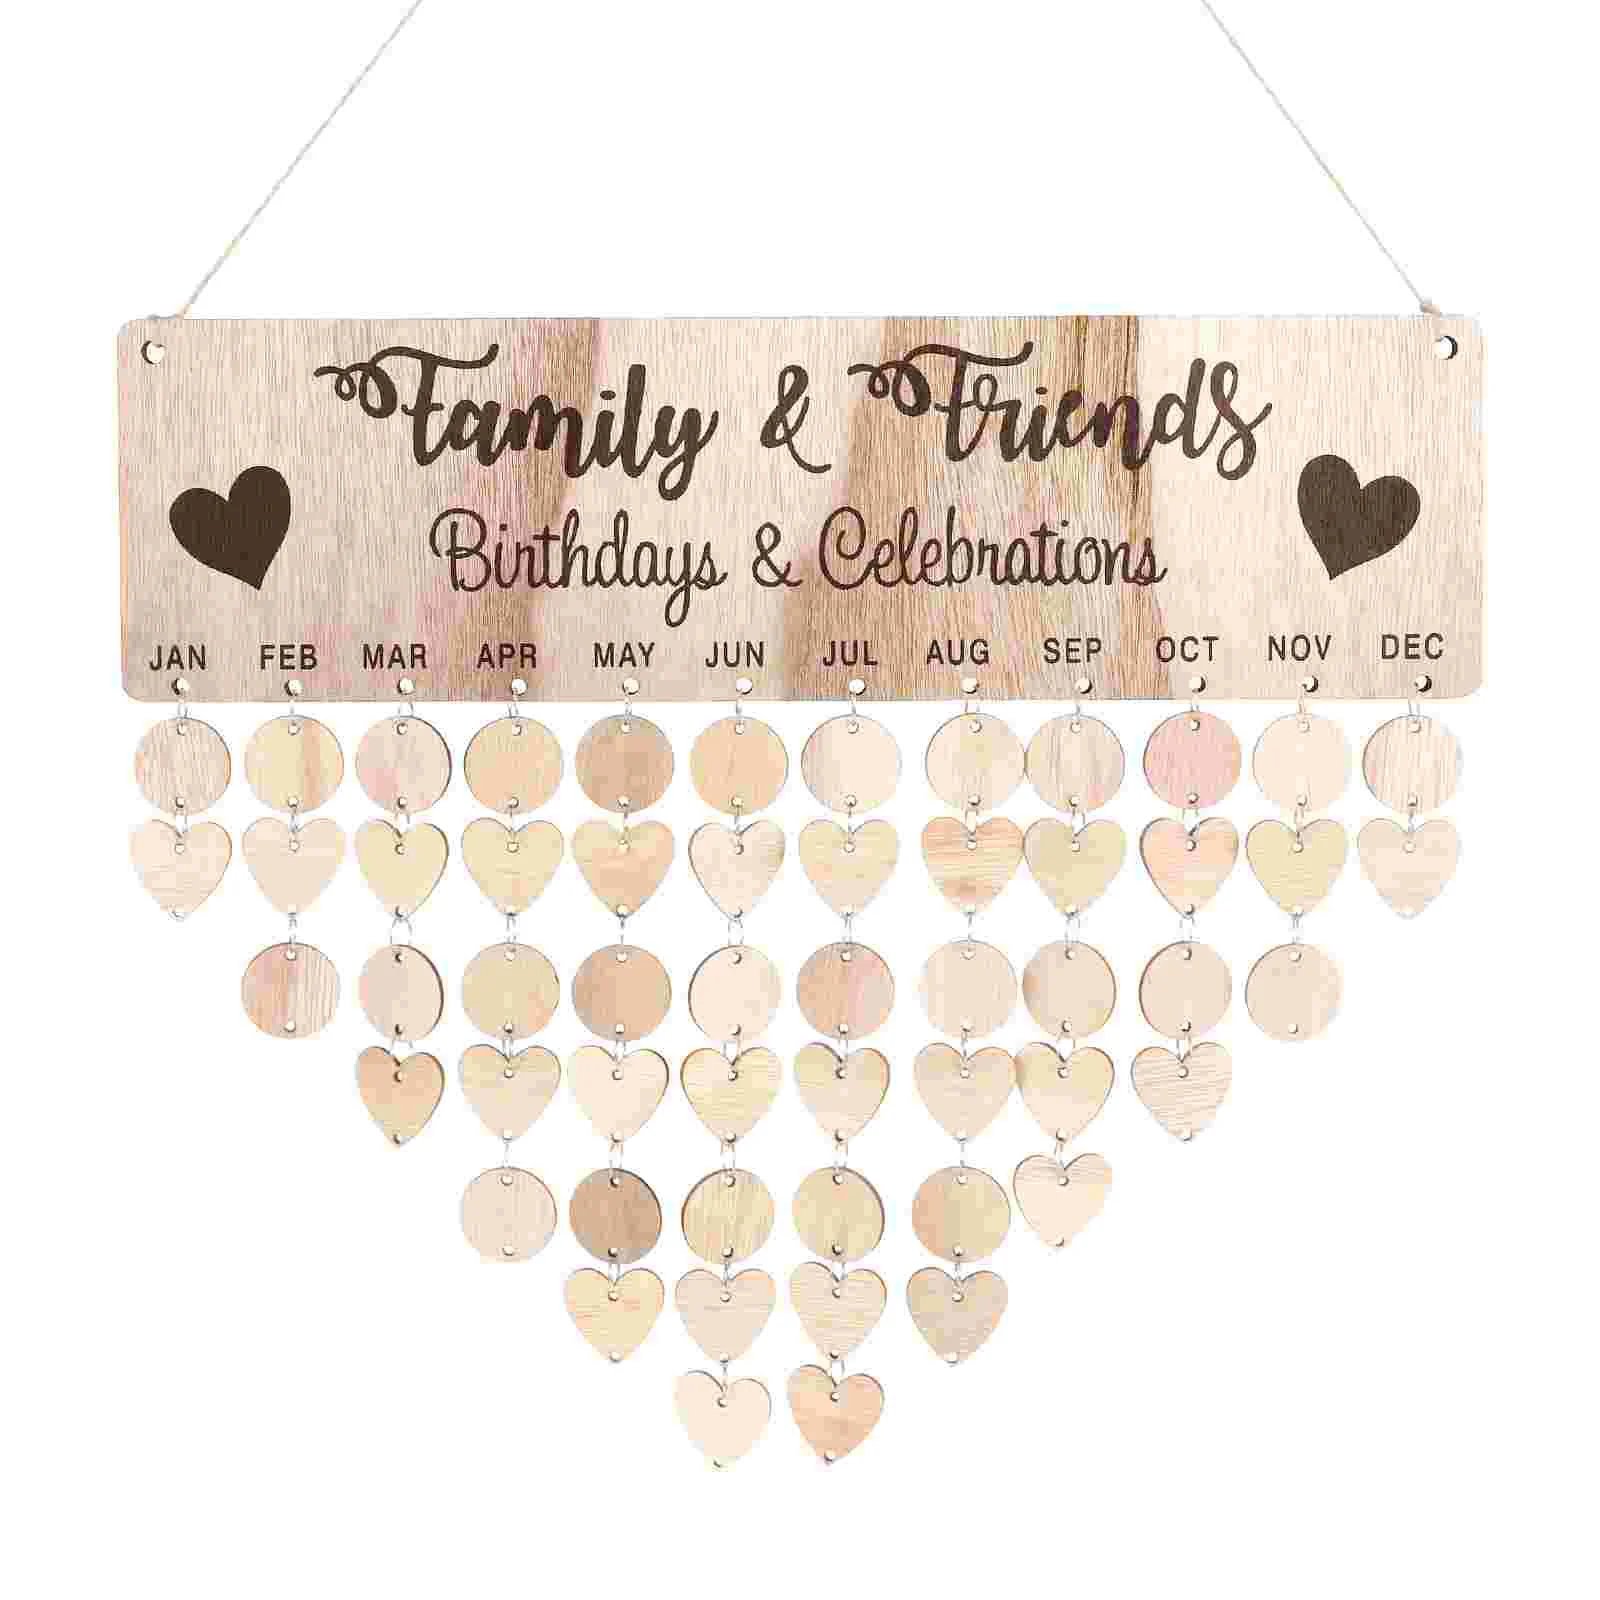 Calendar Birthday Family Board Hanging Wooden Wall Reminder Plaque Diy Personalized Wood Gifts Date Reminding Home Decor Tags chritsmas birthday special days reminder board home hanging decor wooden calendar board hanging ornament new year decoration